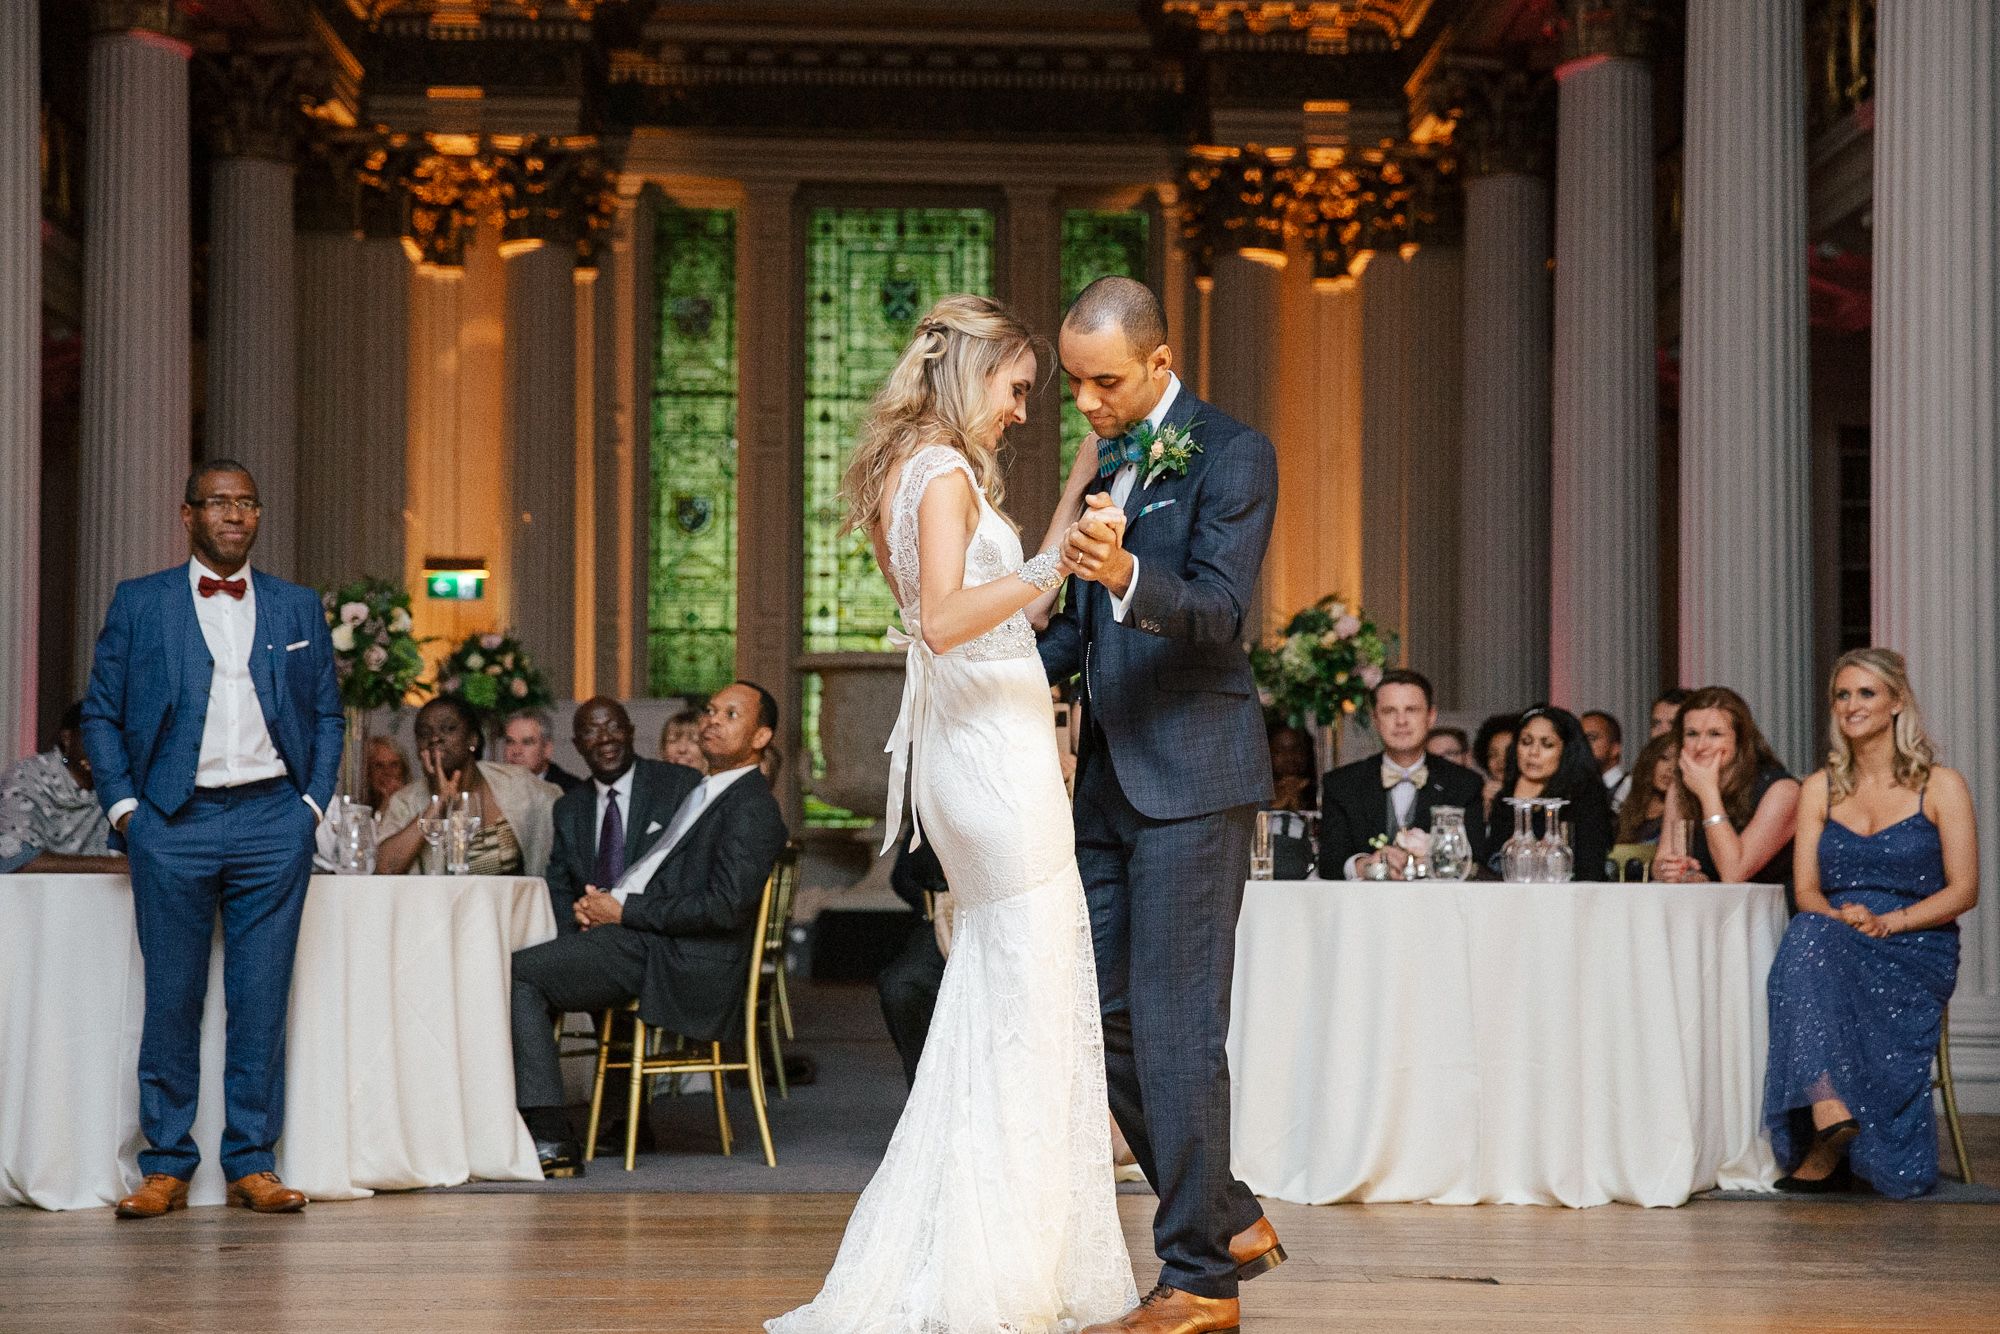 Signet Library wedding bride and groom first dance